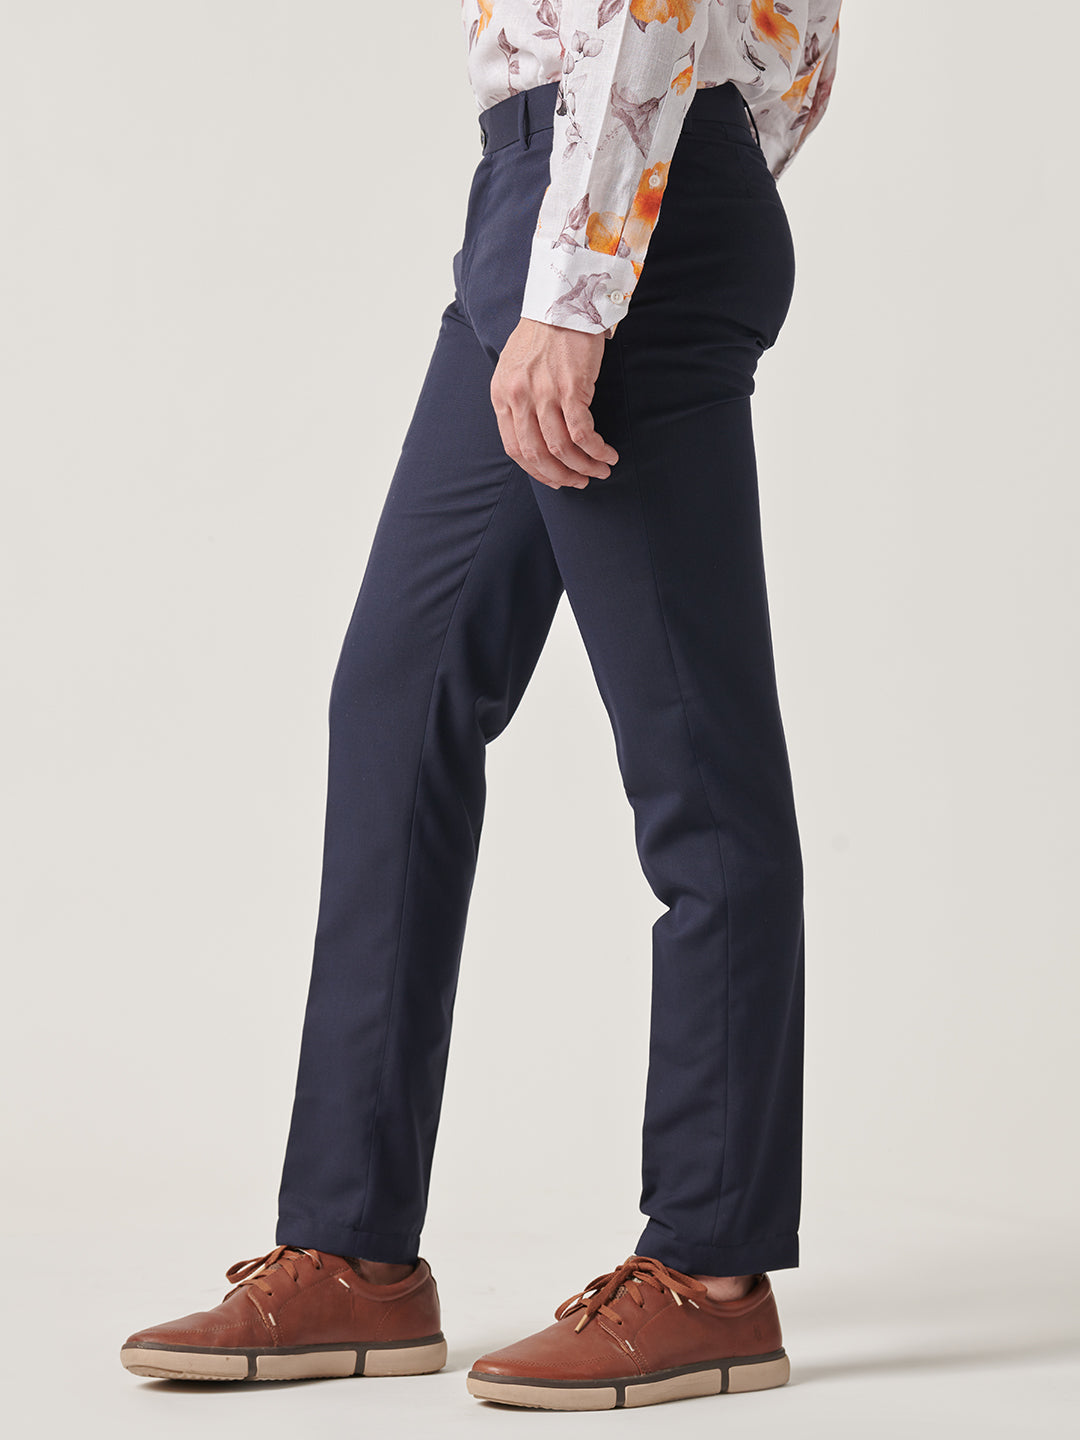 Buy Men's Beige Regular Fit Formal Trousers Online In India At Discounted  Prices